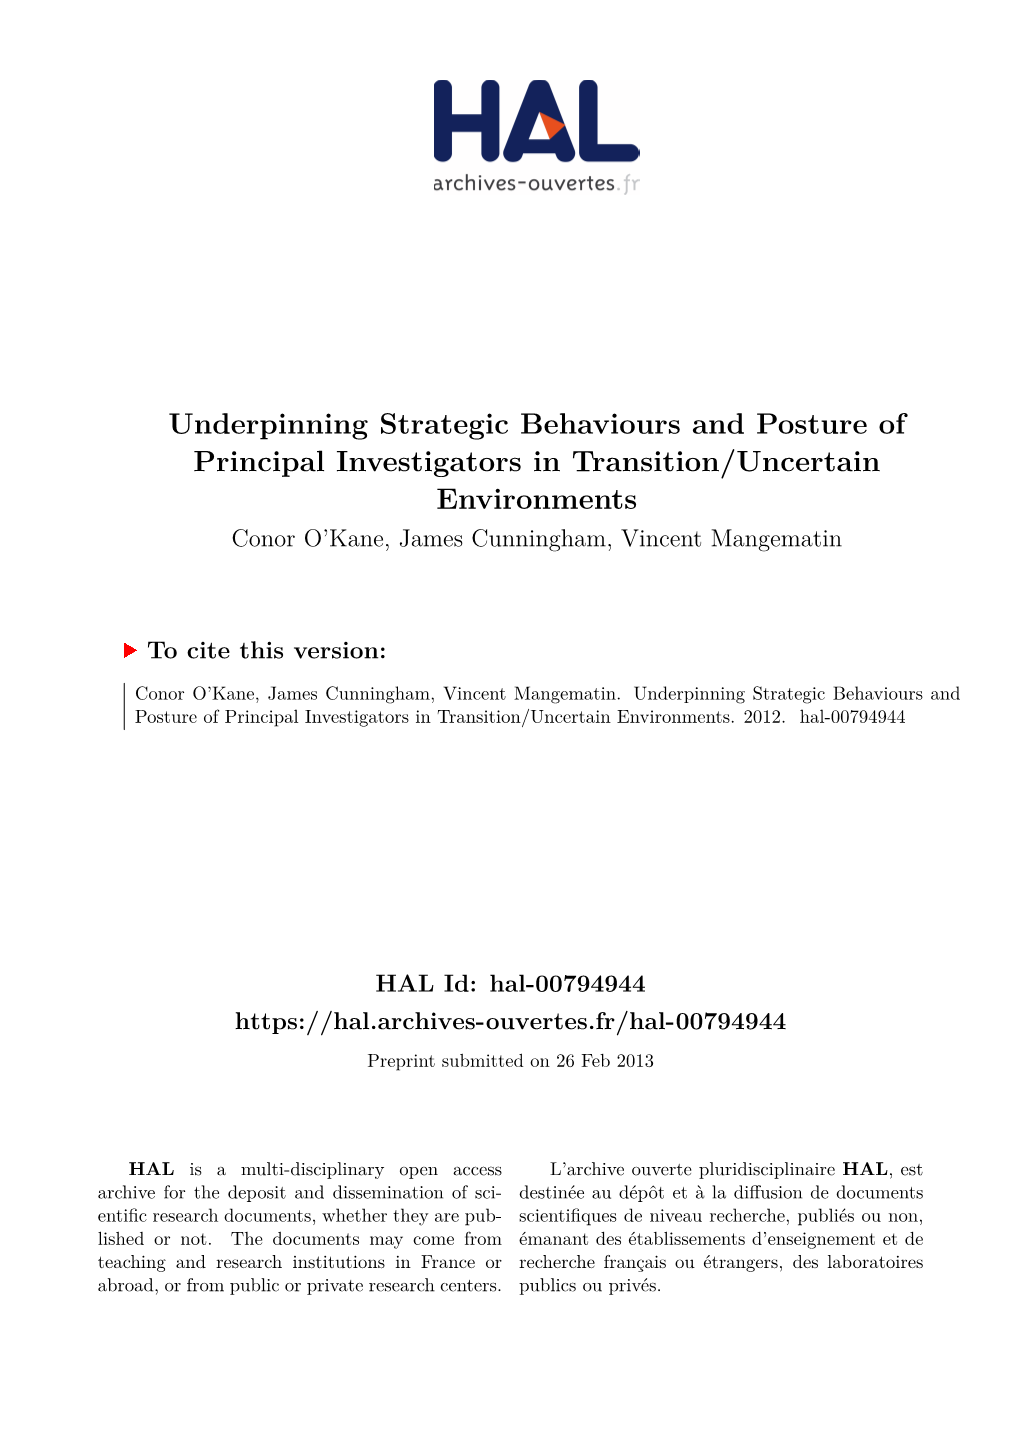 Underpinning Strategic Behaviours and Posture of Principal Investigators in Transition/Uncertain Environments Conor O’Kane, James Cunningham, Vincent Mangematin